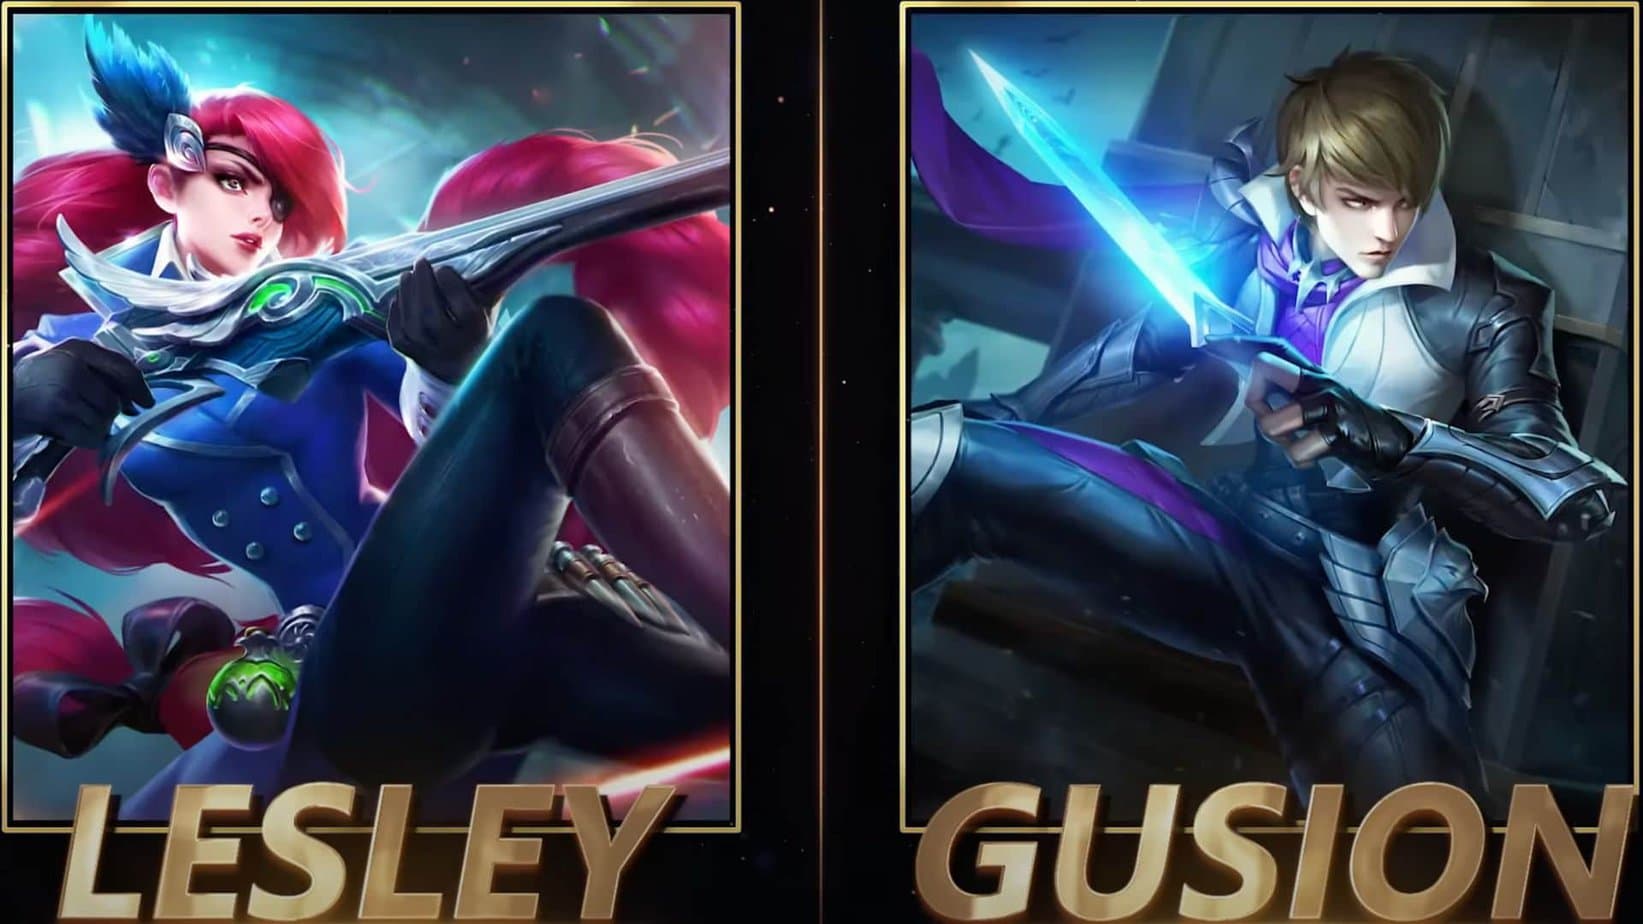 Gusion and Lesley's visual makeovers in Project NEXT update | ONE Esports